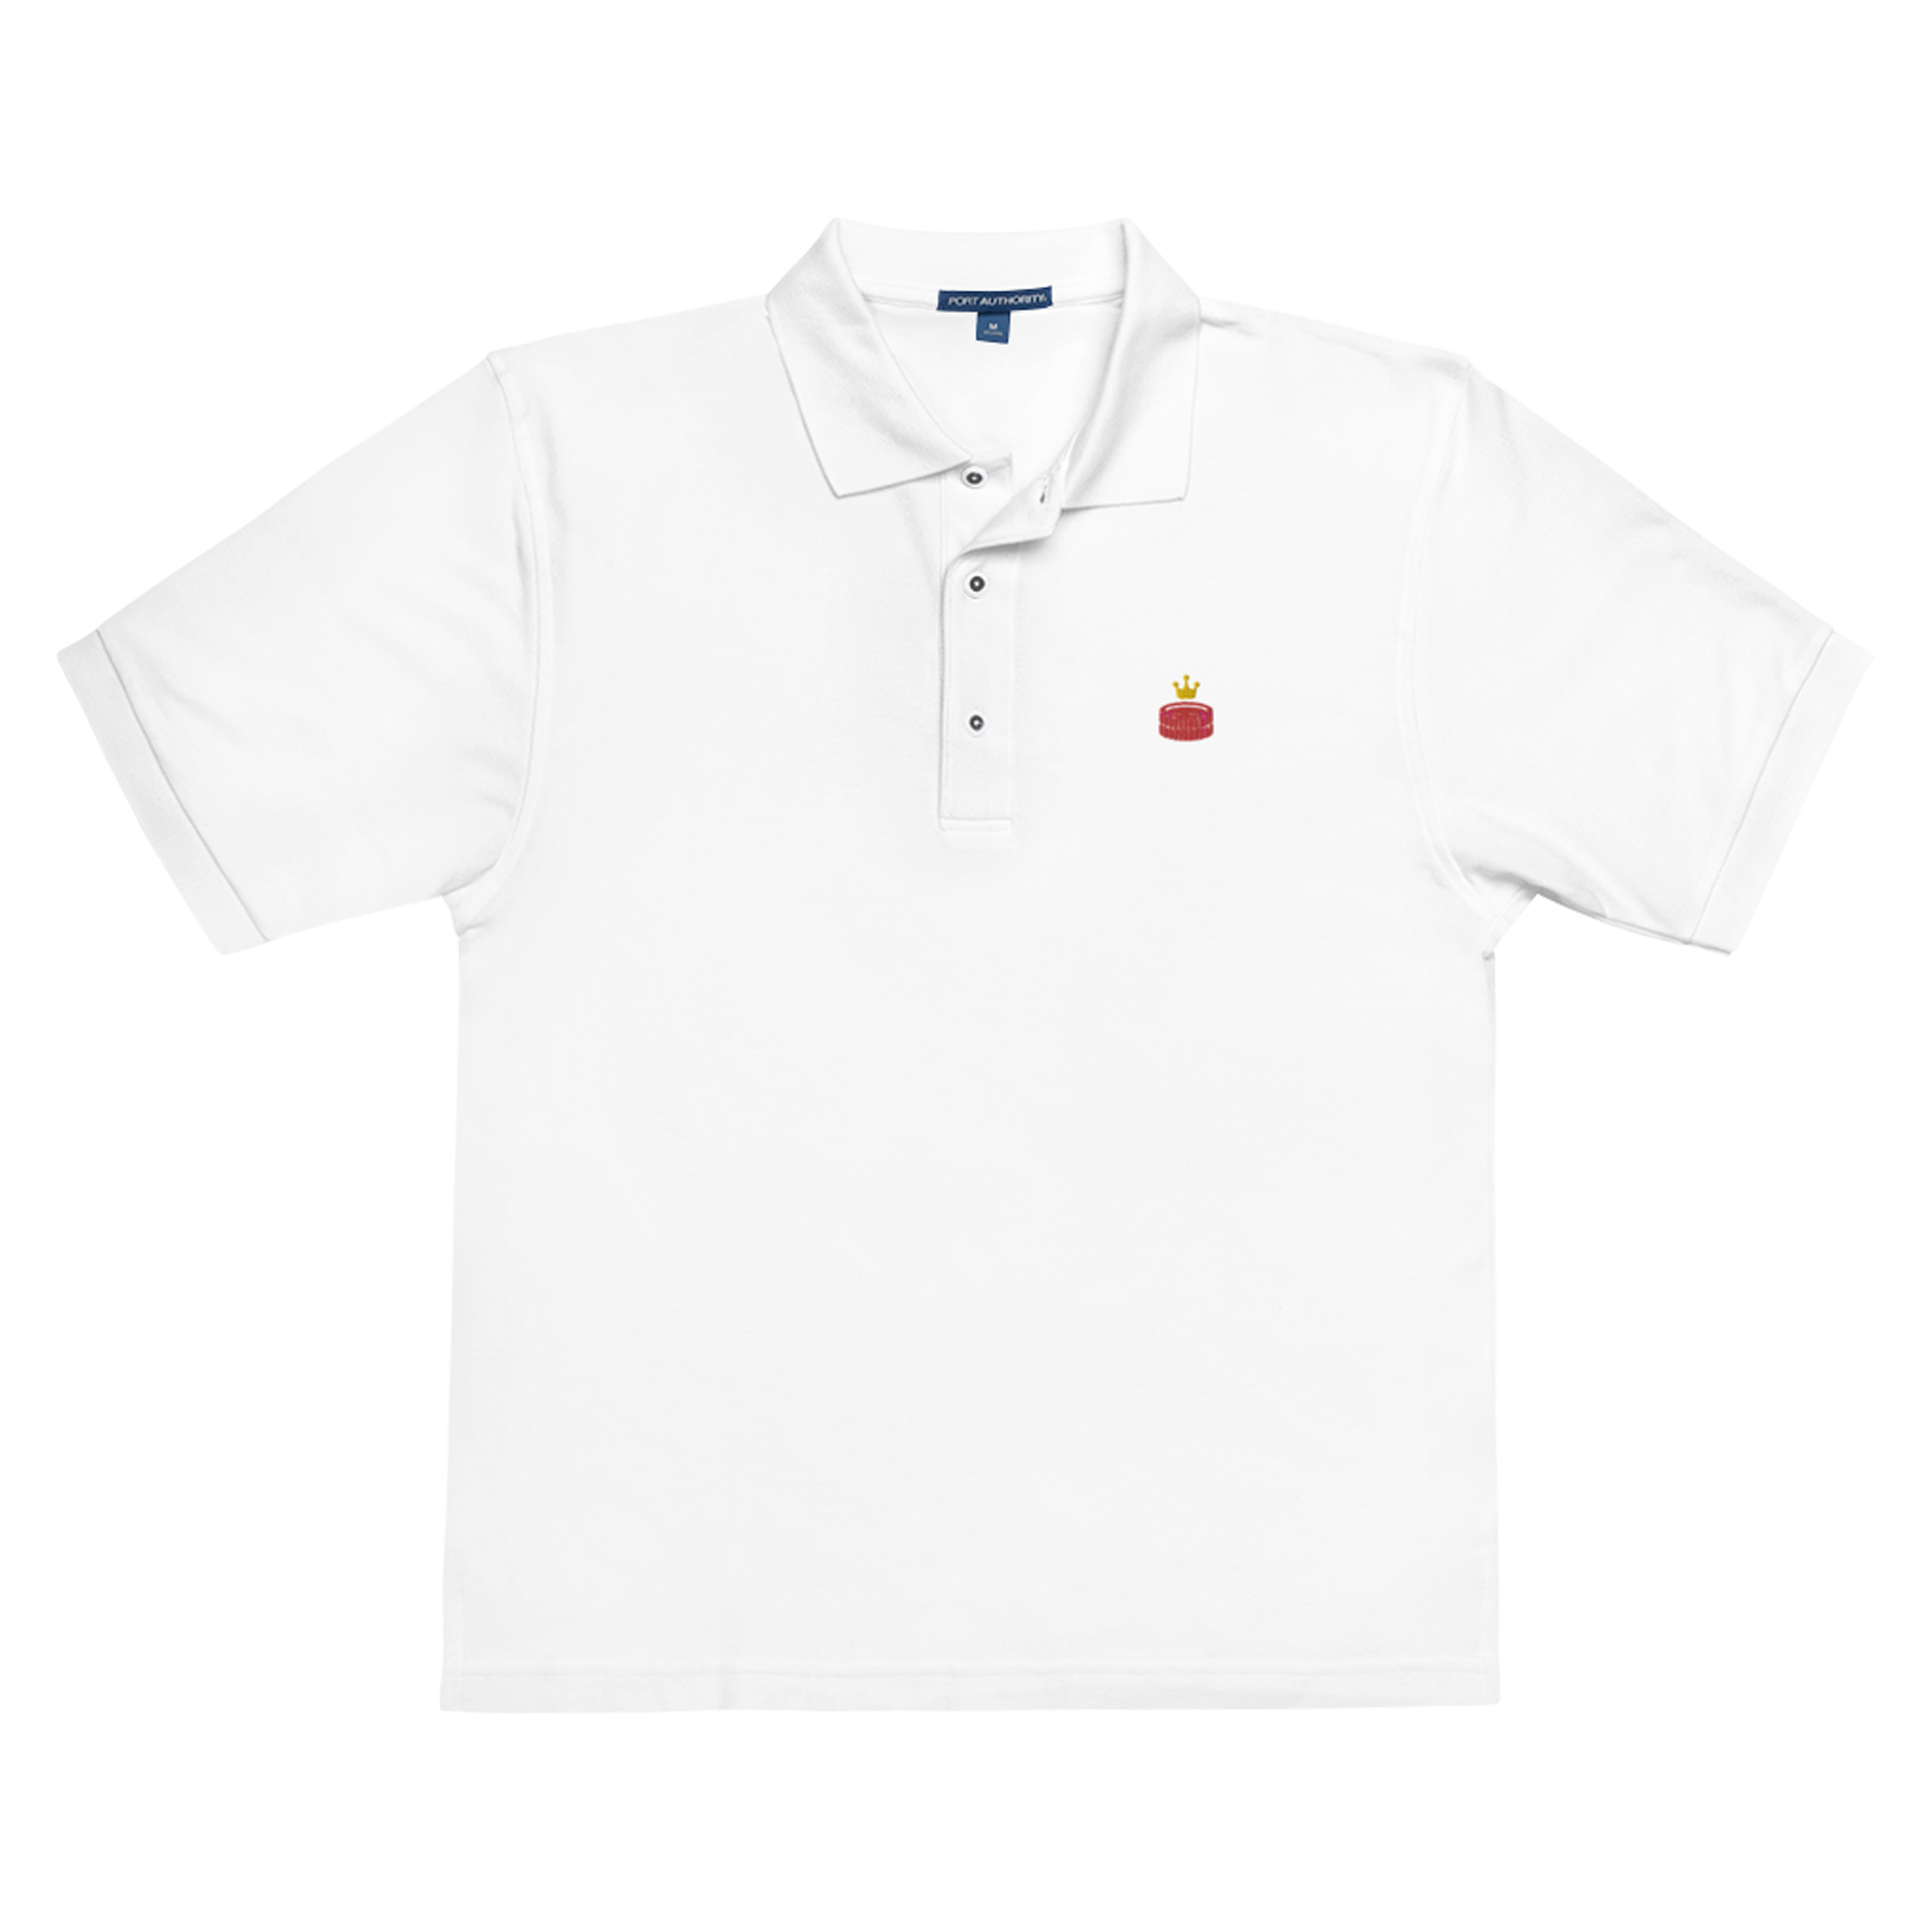 King Me Embroidered Polo | Rollacrit